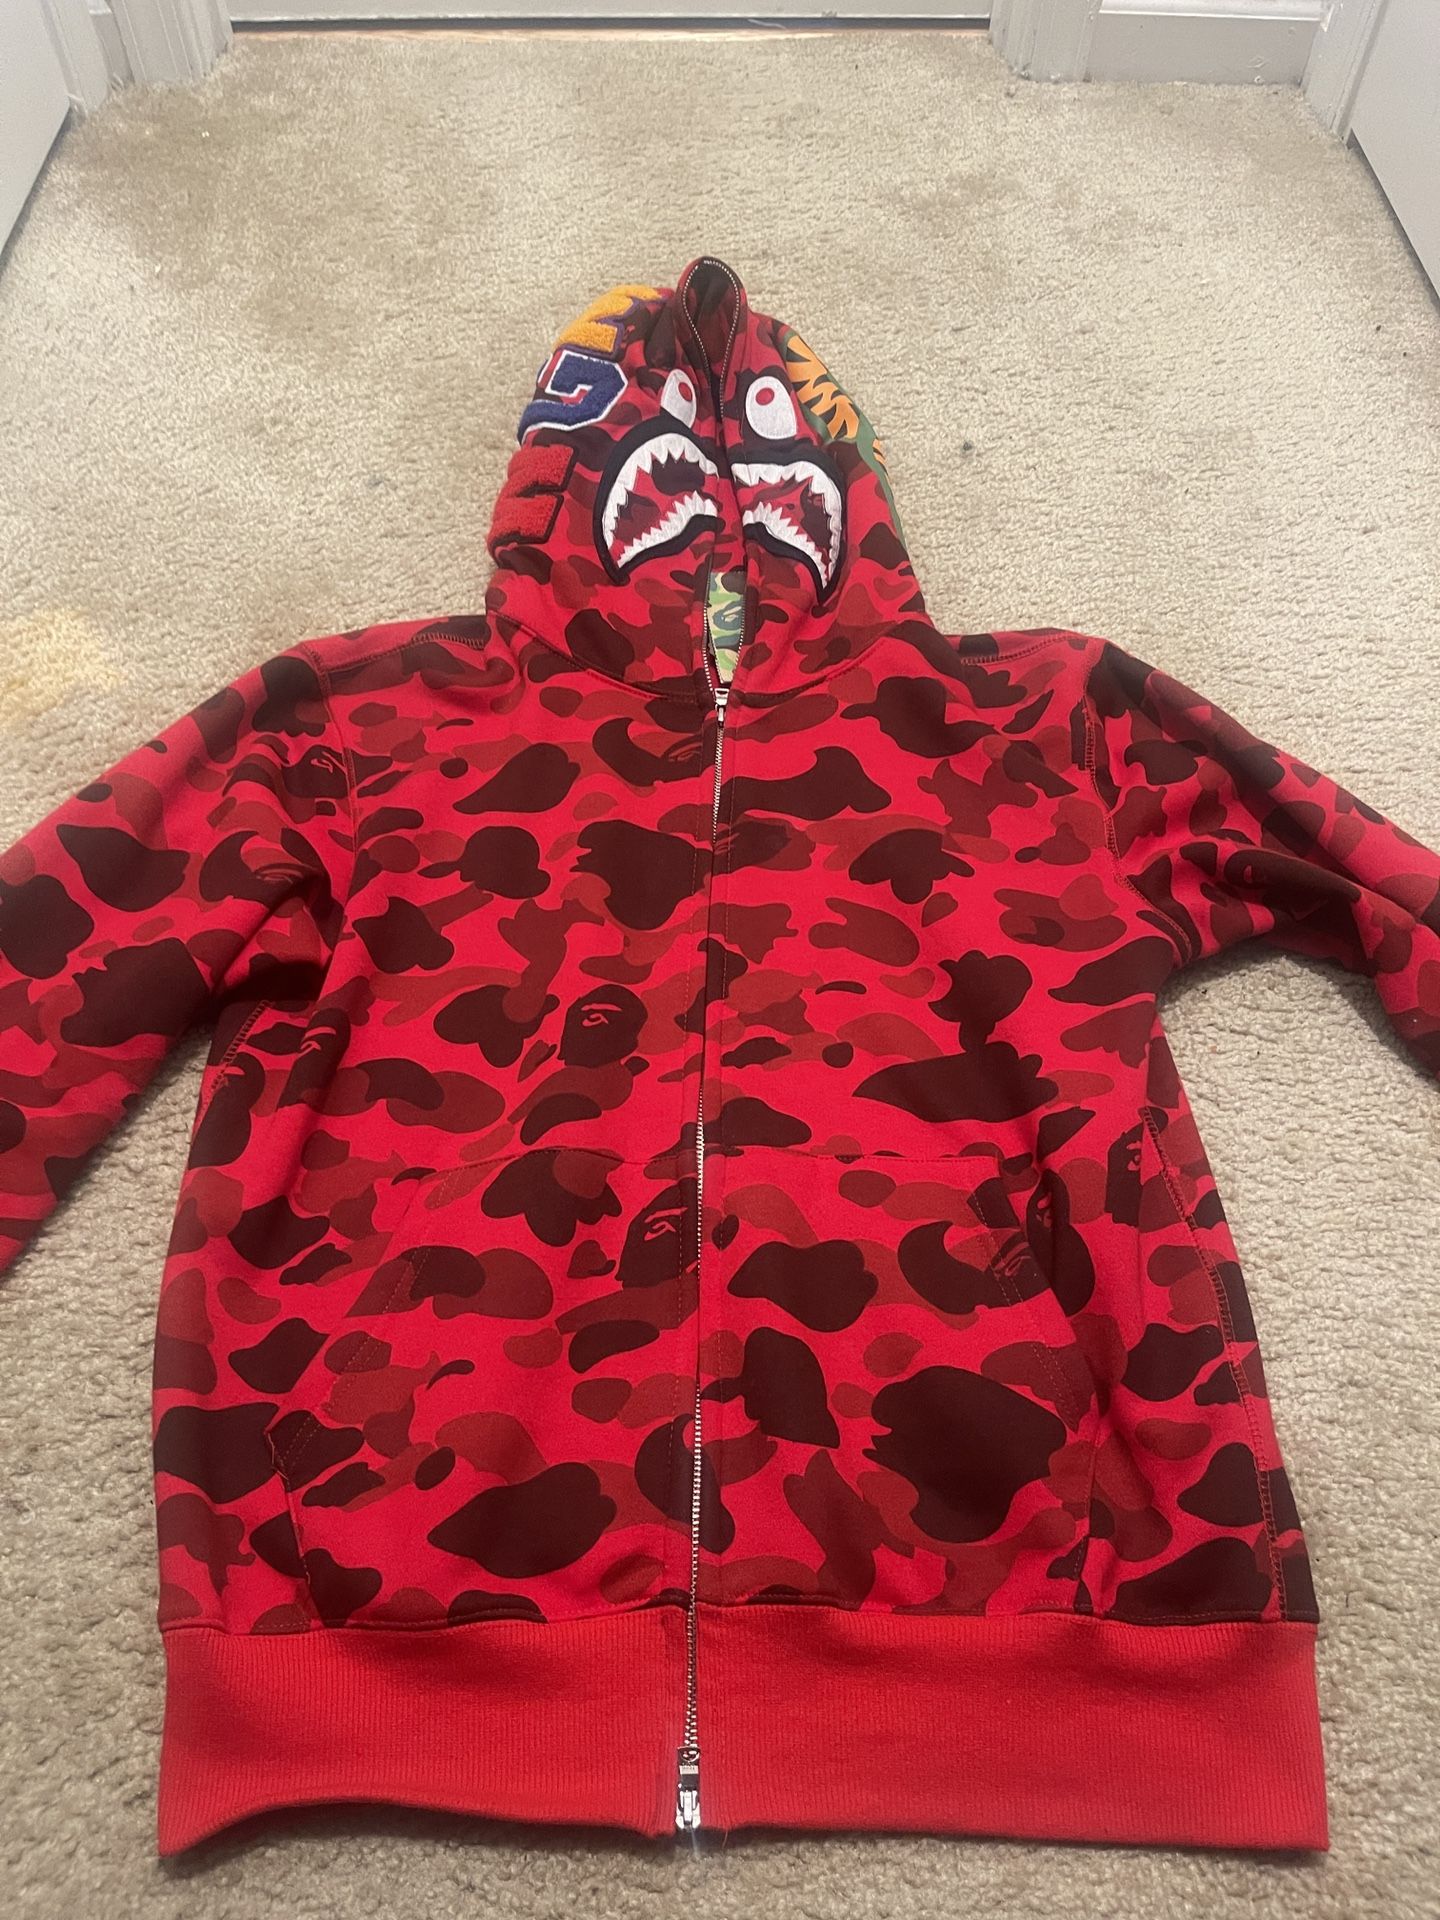 (Best Offer Takes Them)Red Camo Bape Hoodie (L)